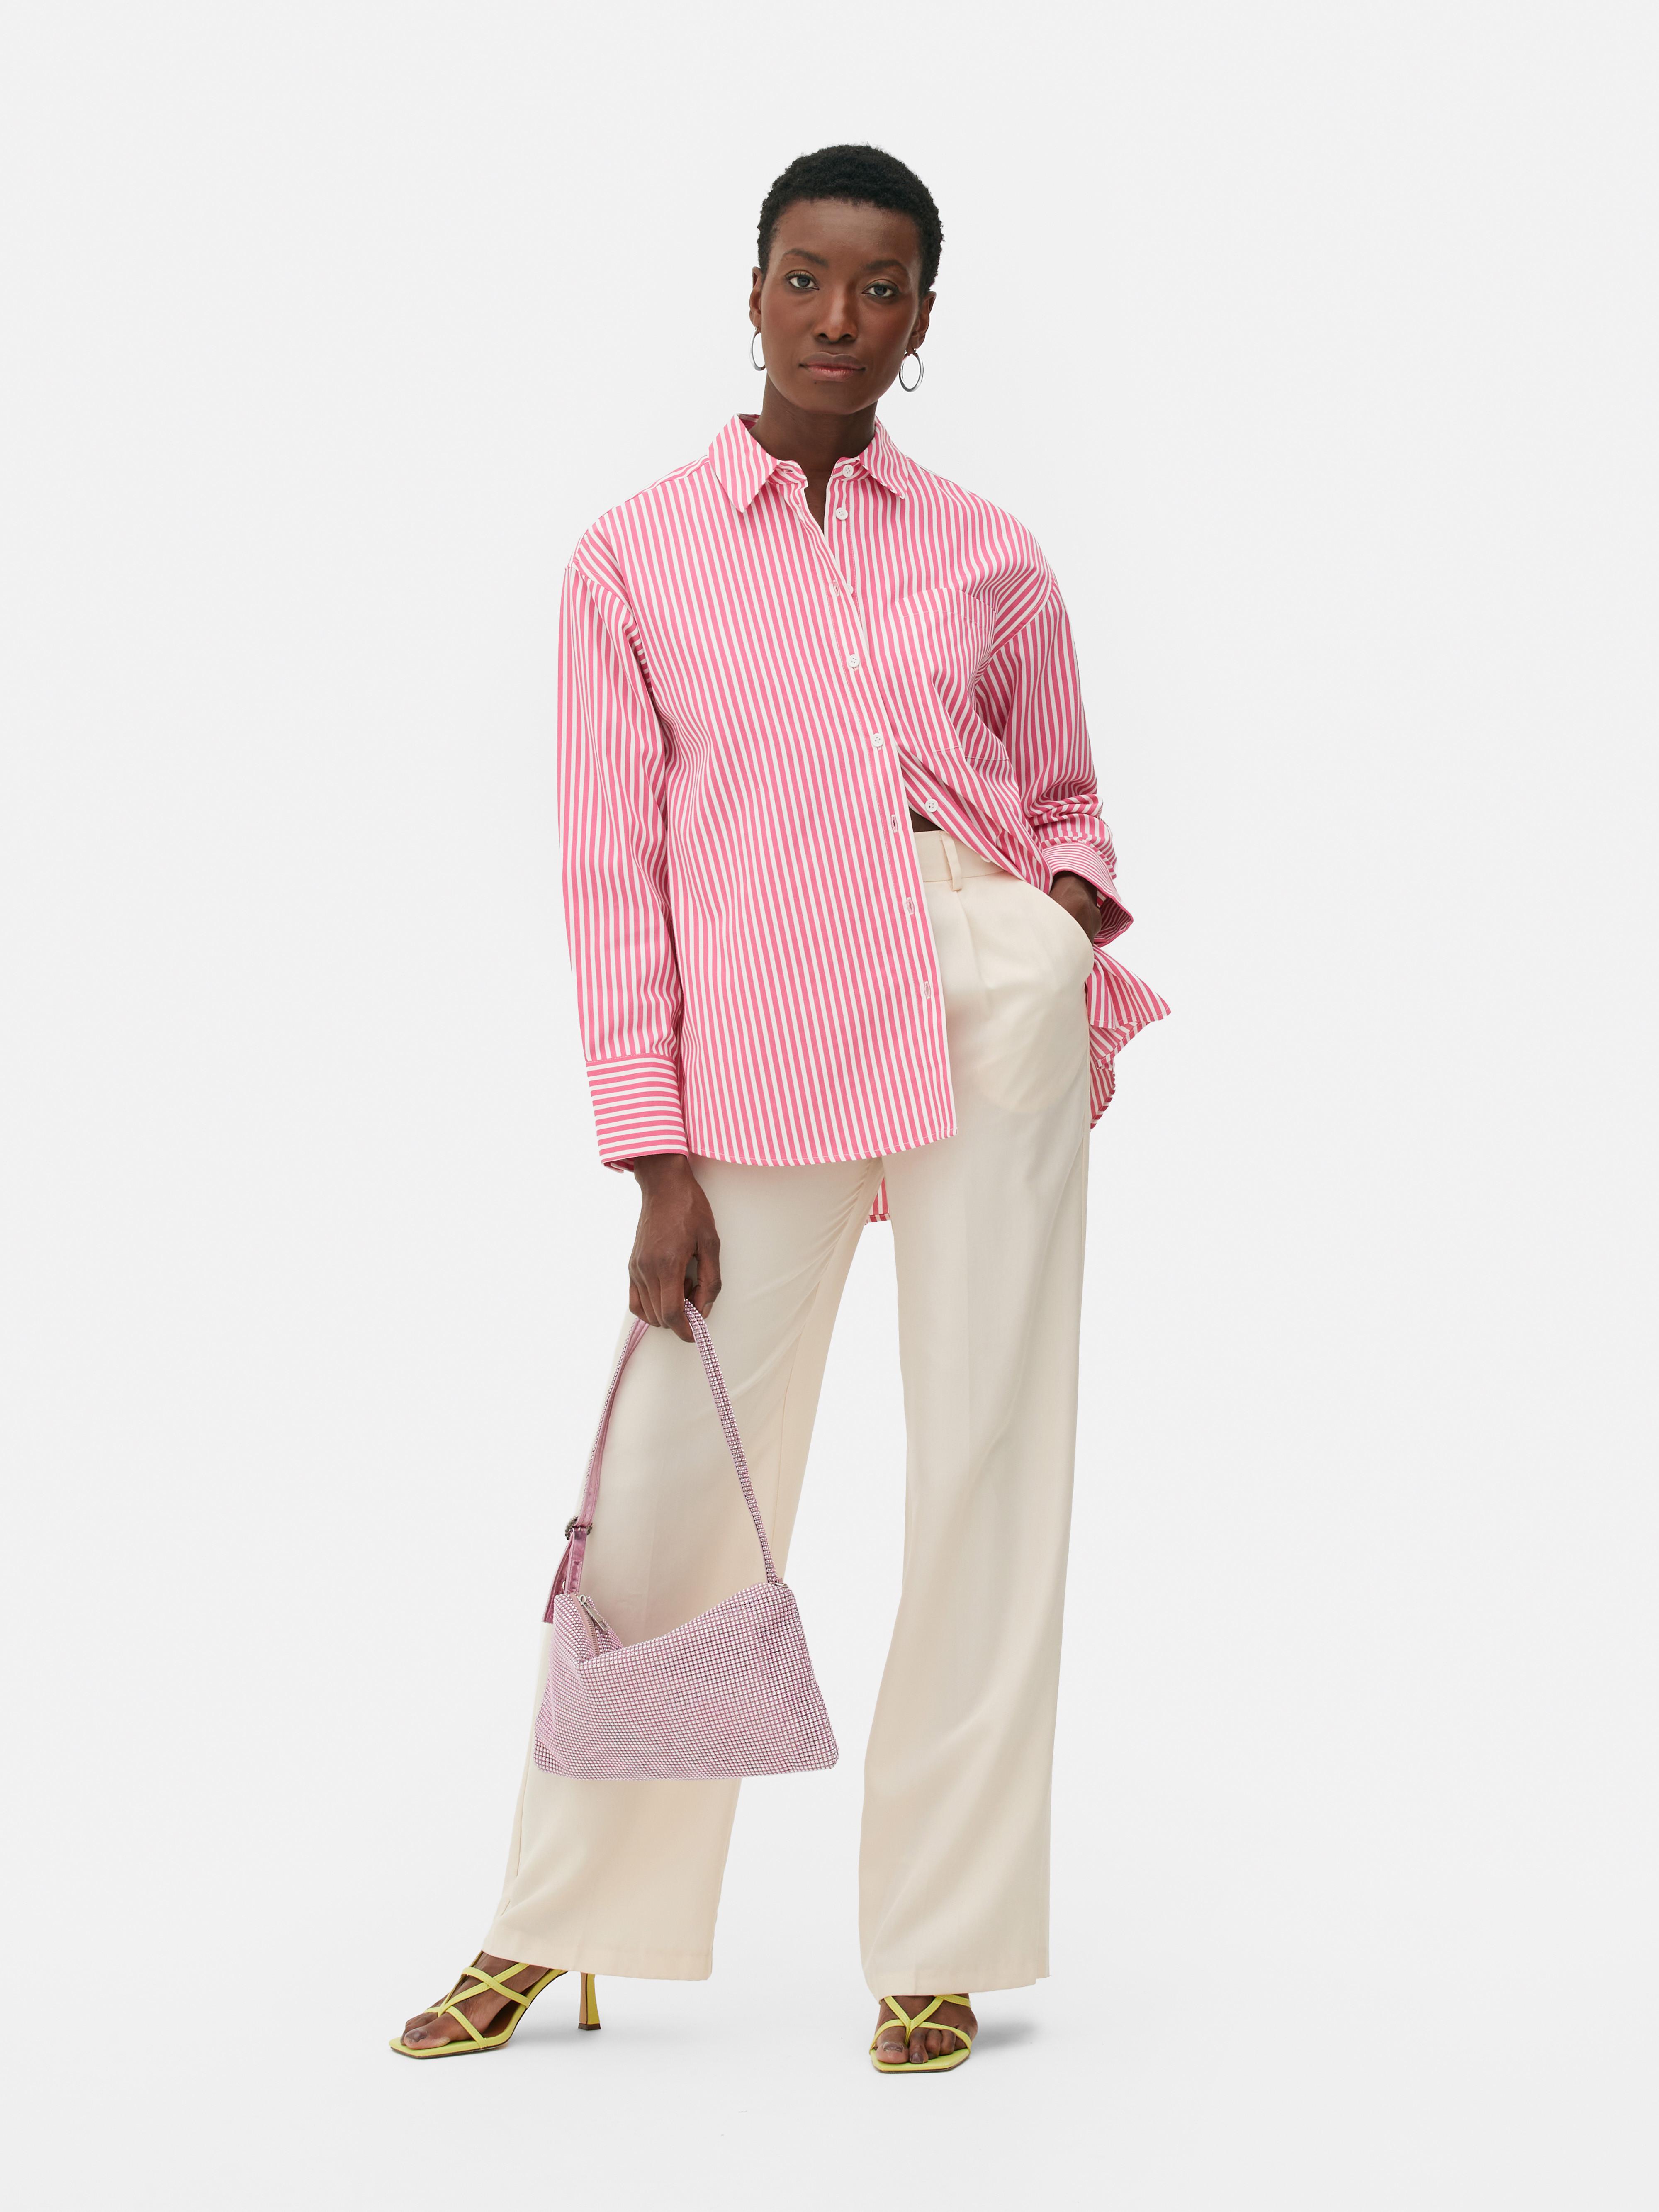 Women's Shirts and Blouses | Primark